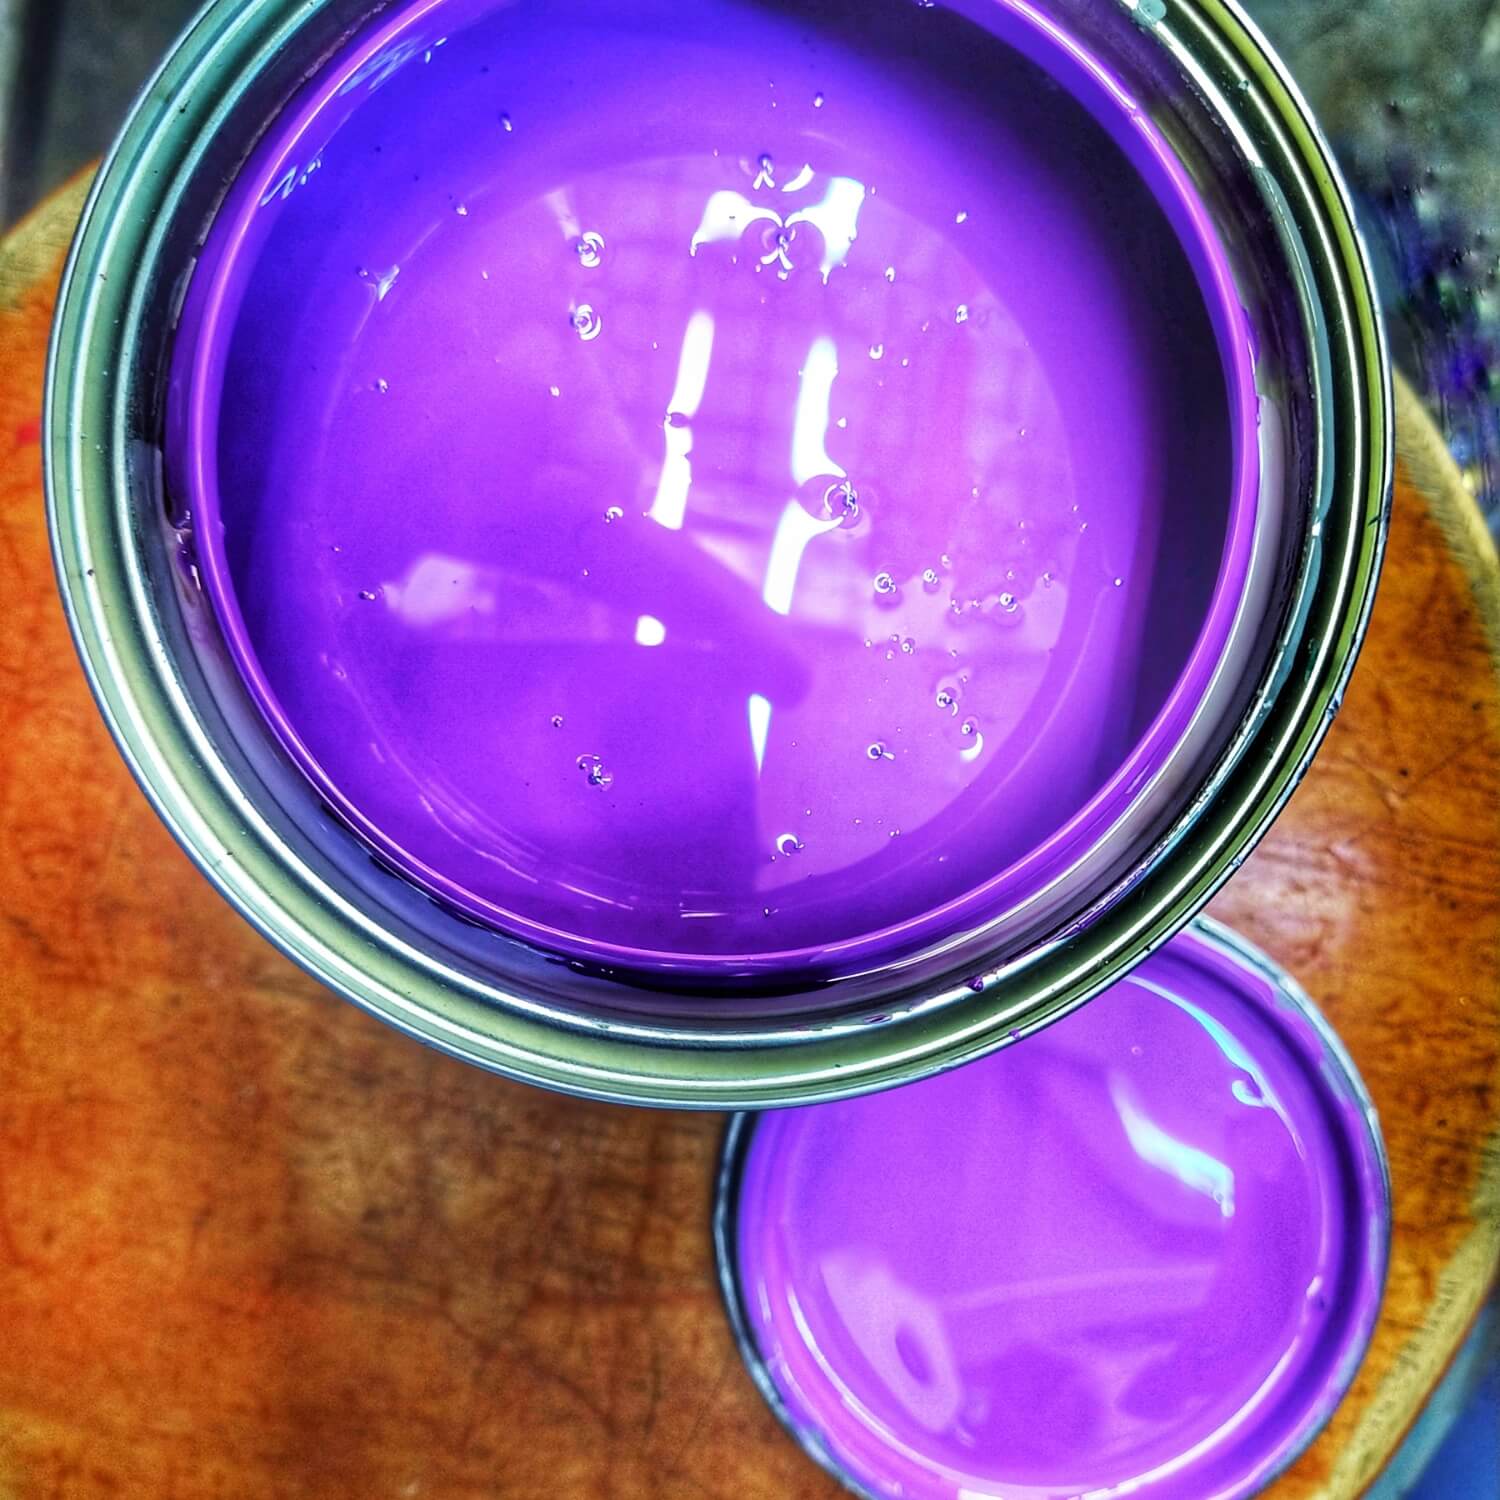 Solvent in purple color